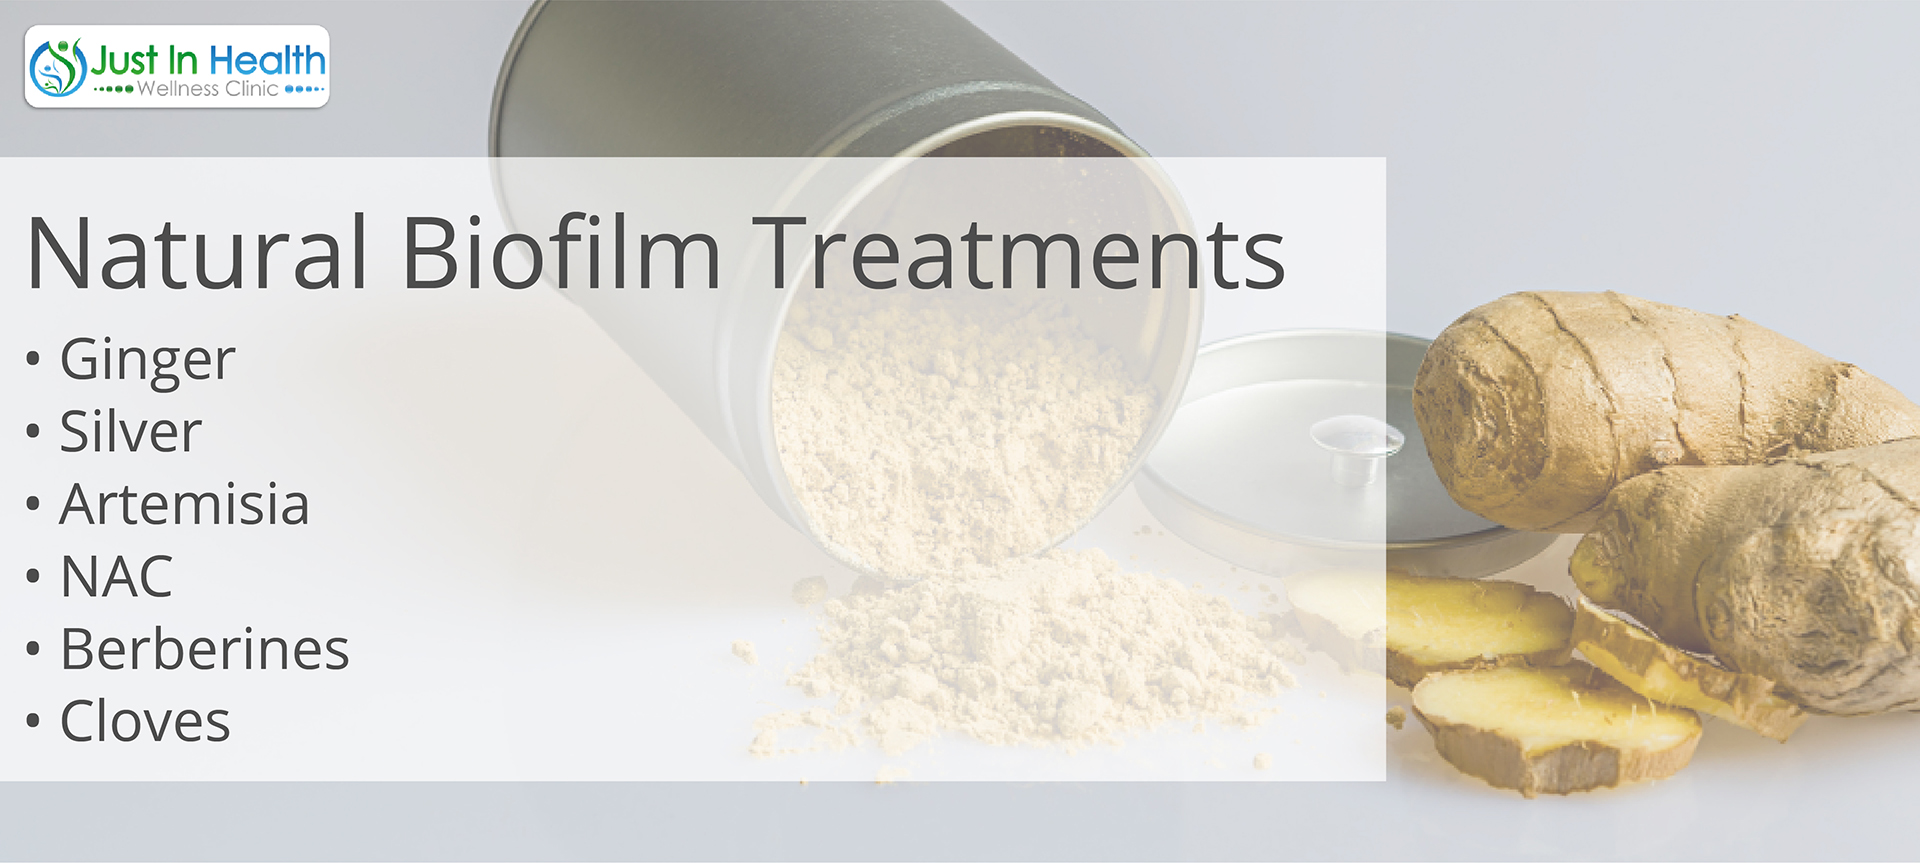 The natural treatments for Biofilms